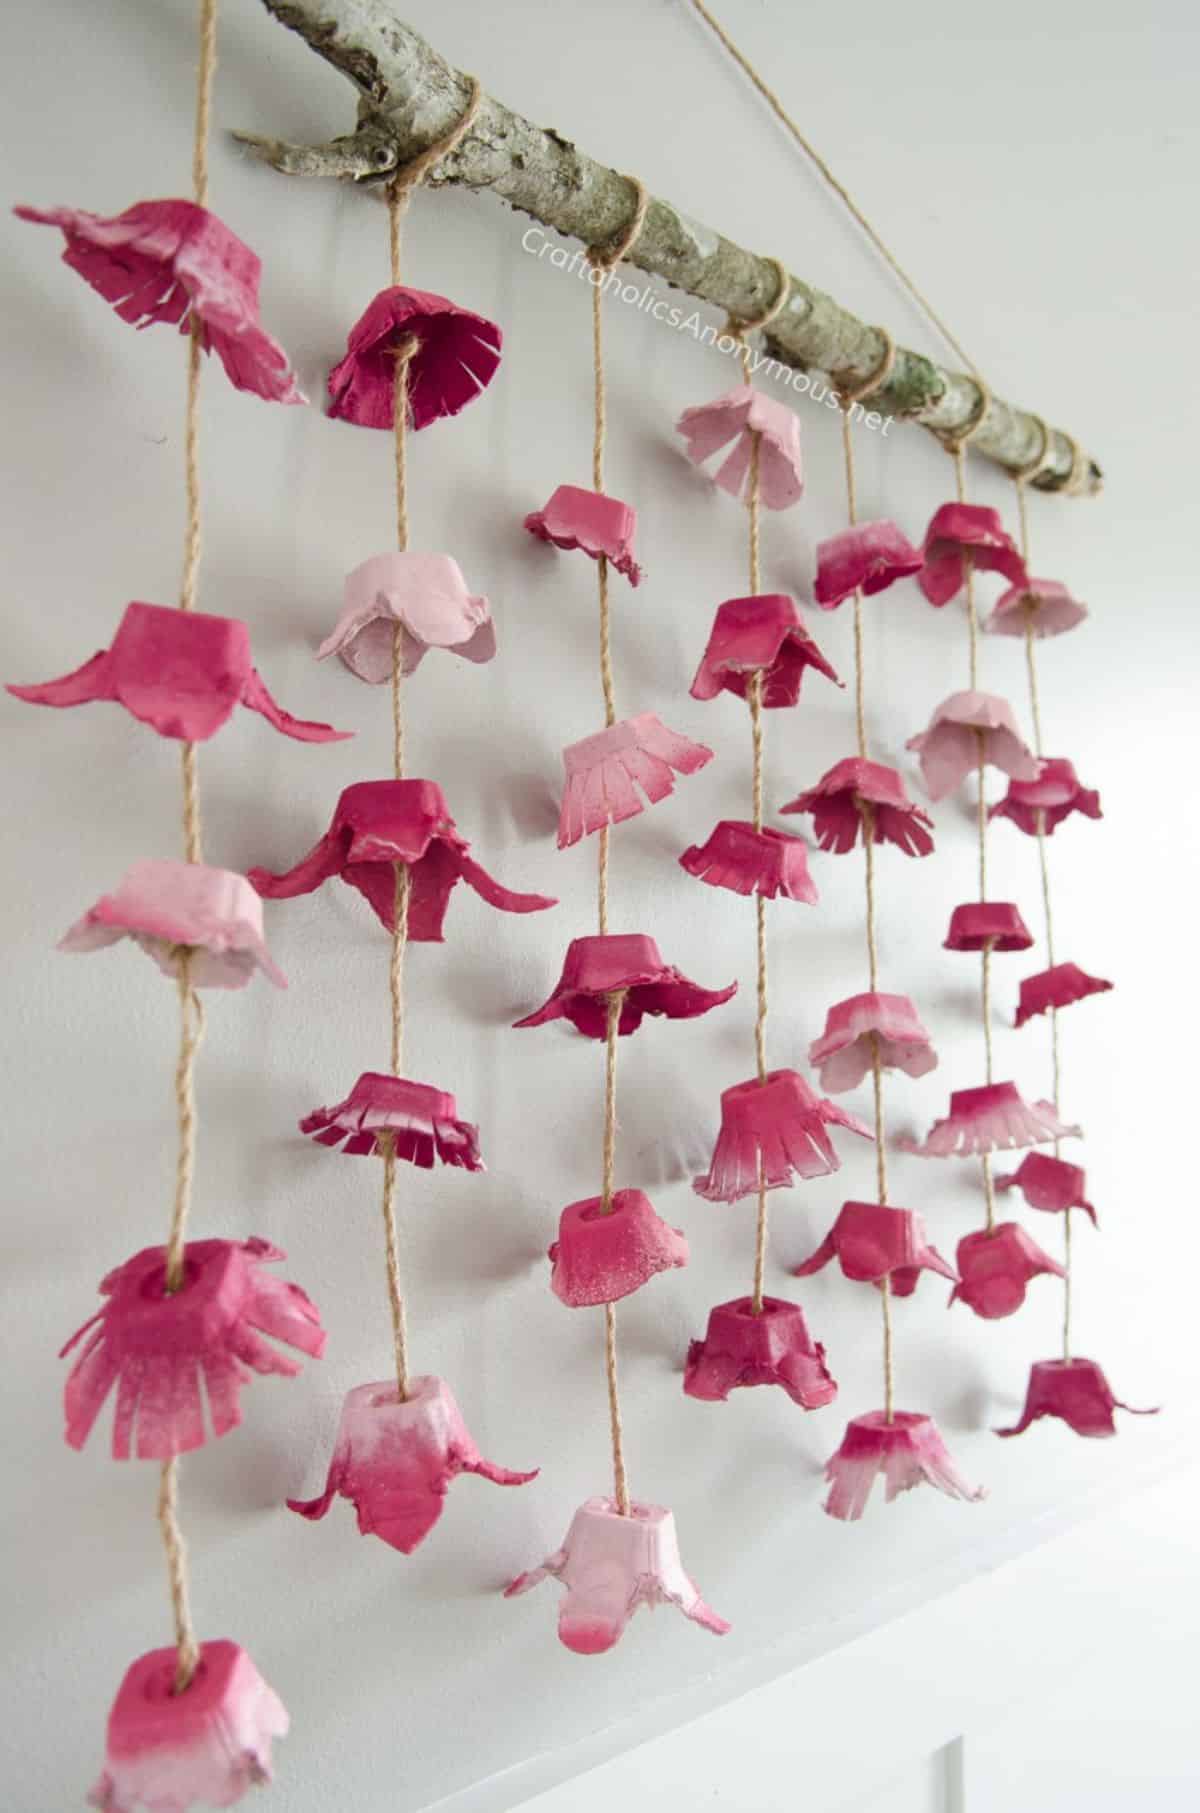 Boho Flower Wall Hanging Made From Egg Cartons